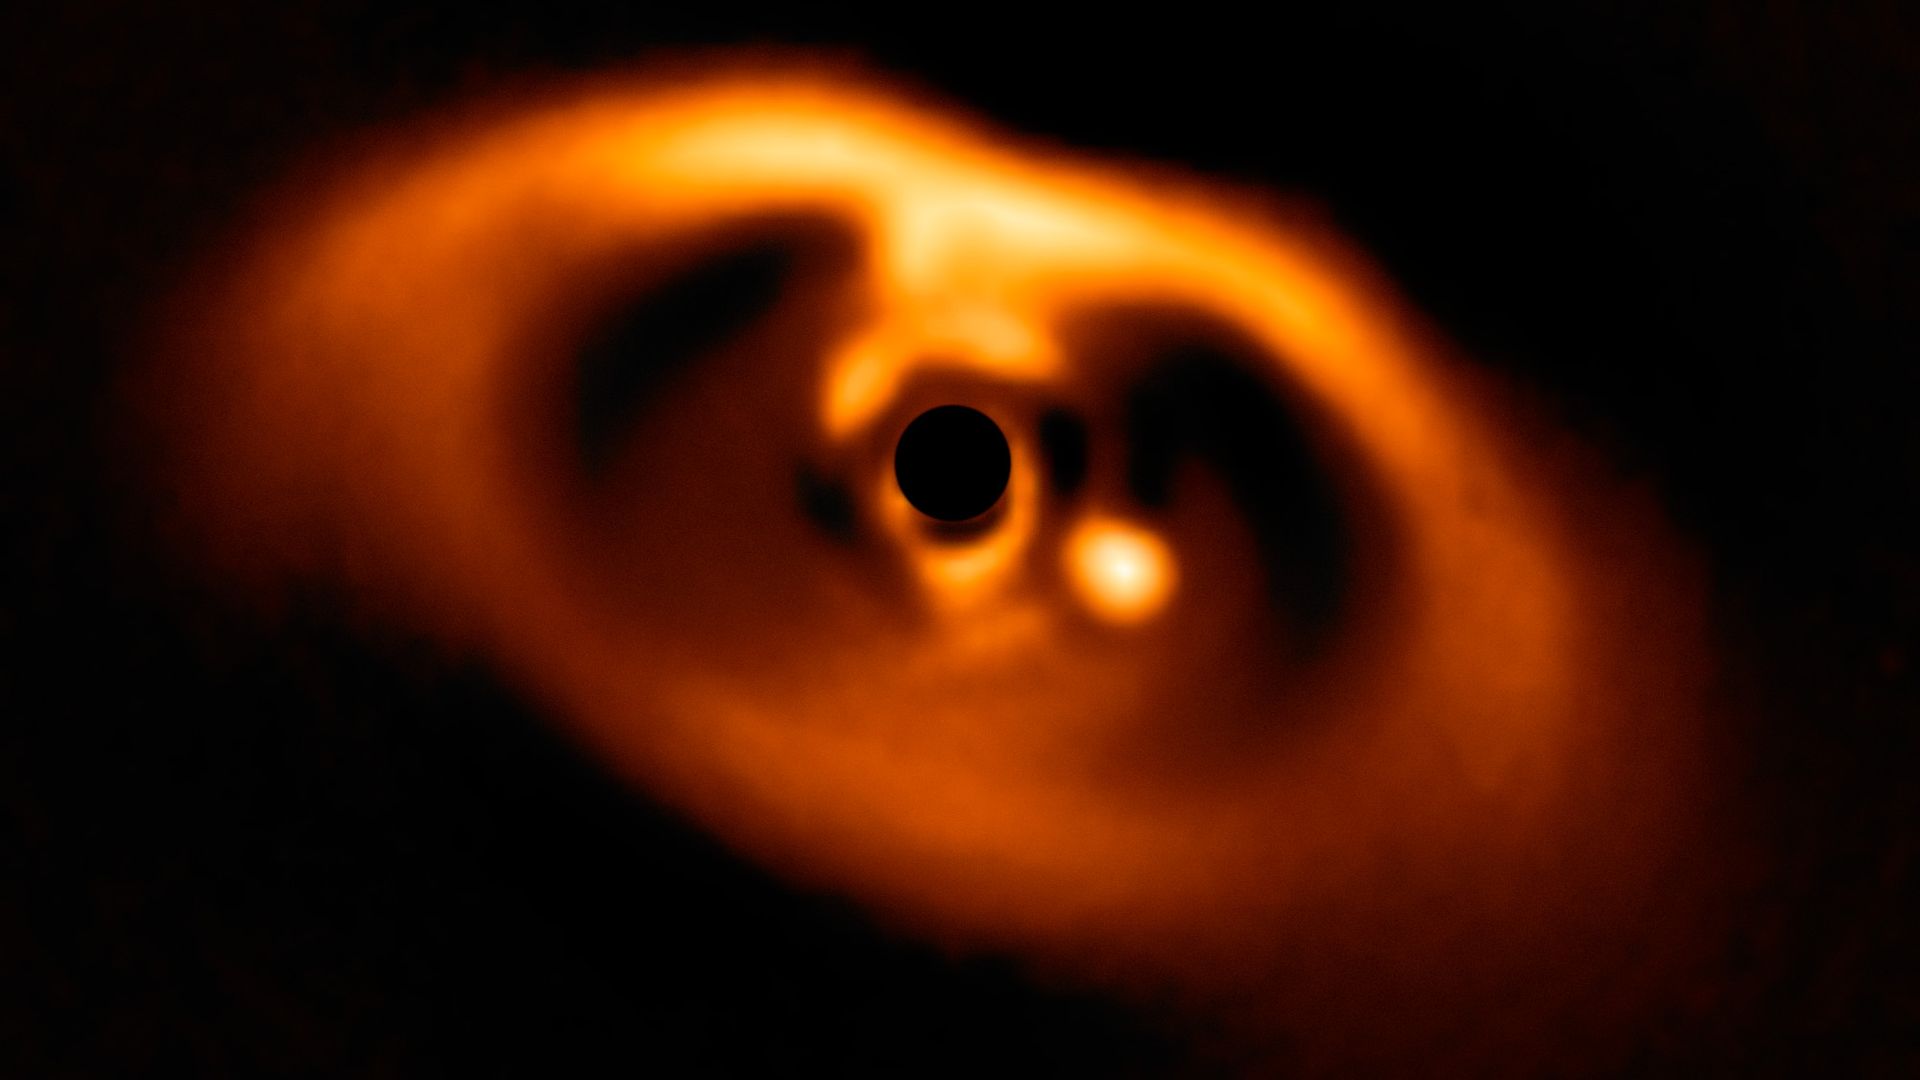 the first clear image of a planet caught in the very act of formation around the dwarf star PDS 70.